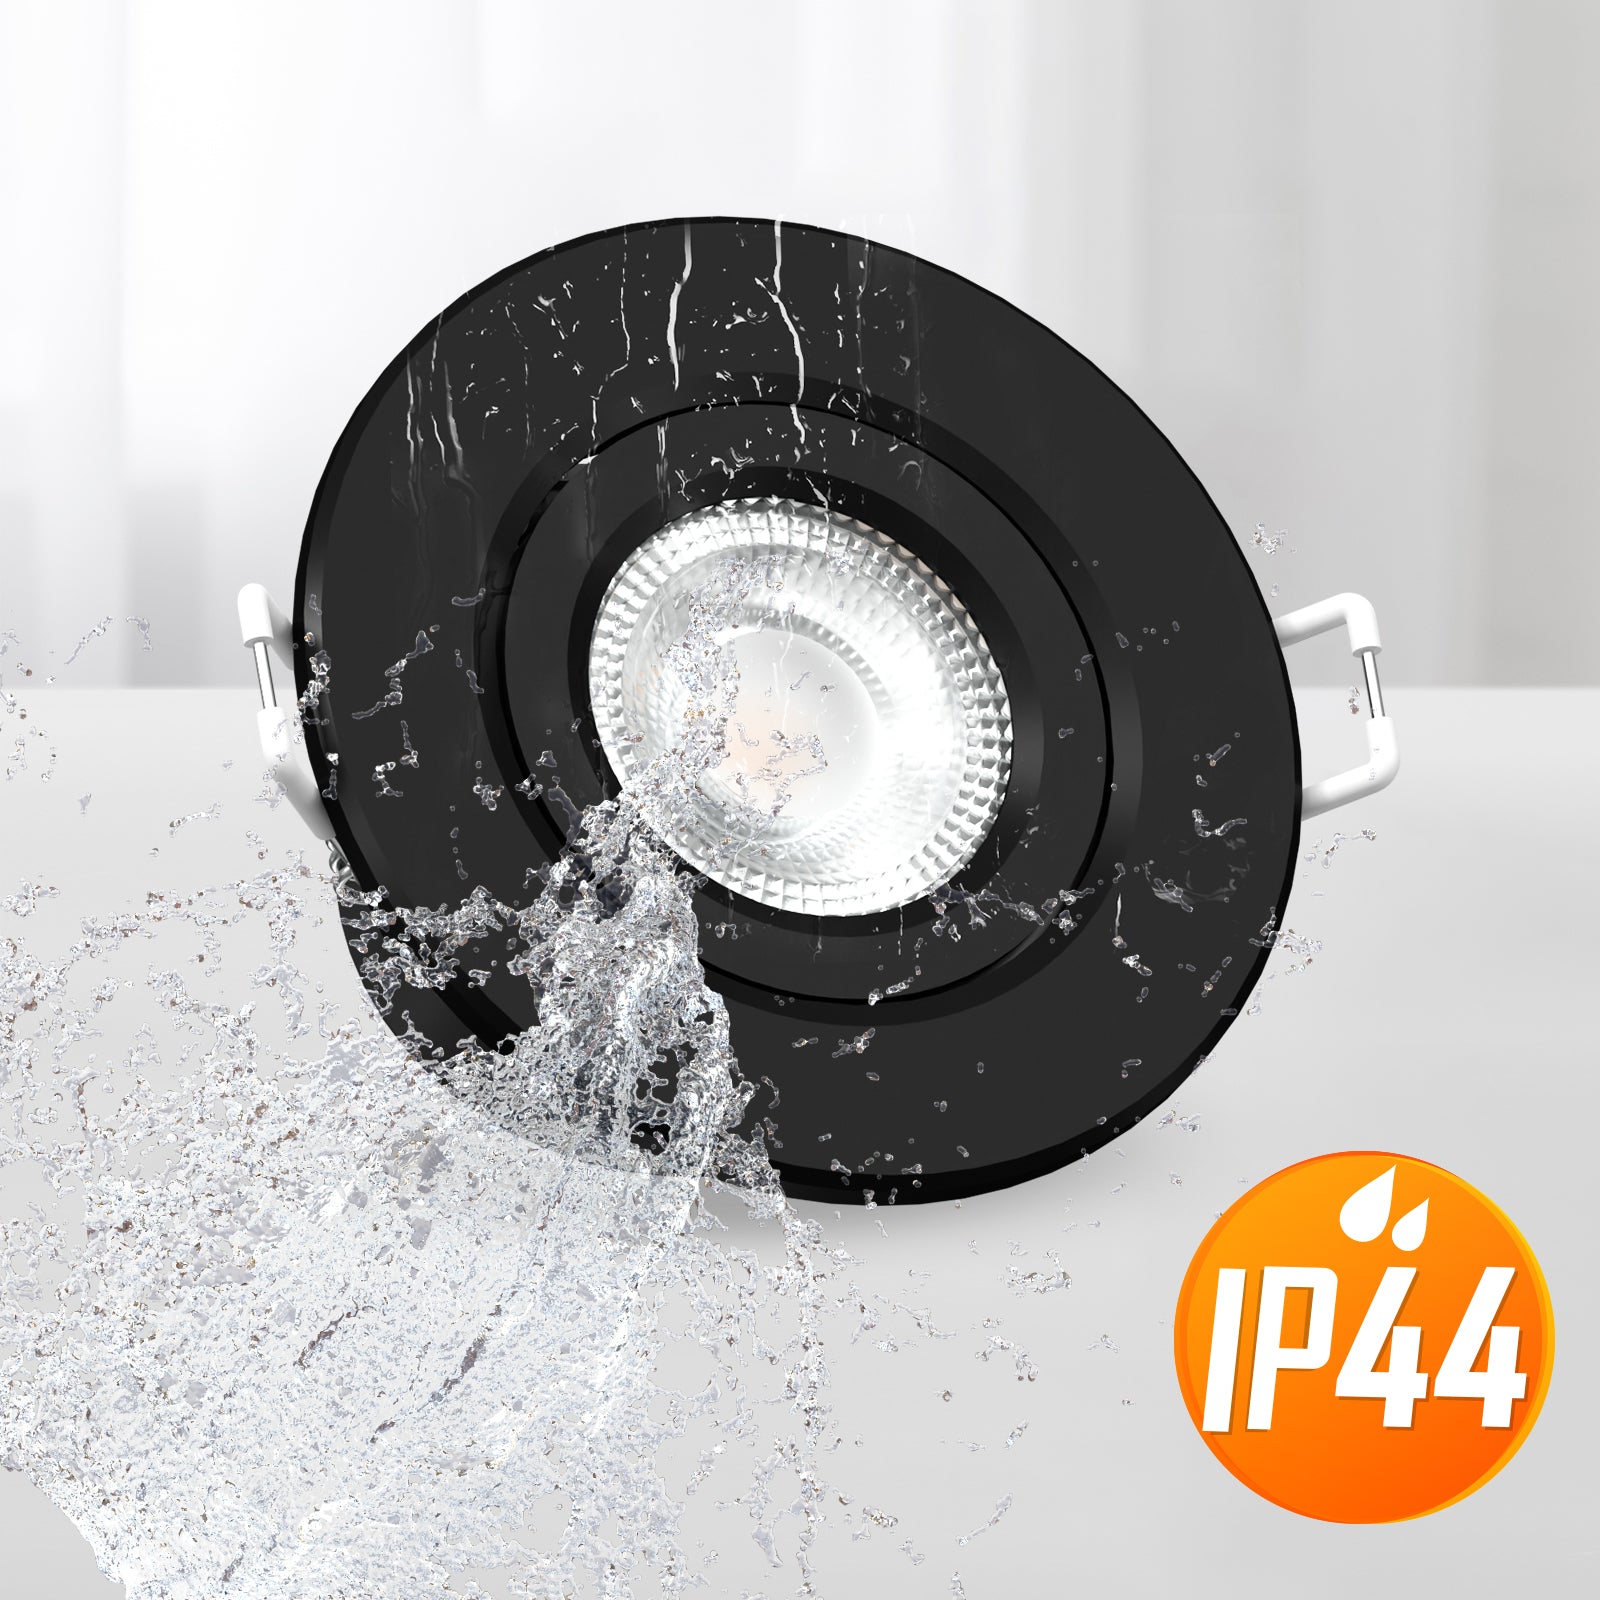 Paul Russells 6W LED Non Fire Rated Tiltable Downlight, Warm/Cool/Day White 3 Adjustable CCT, IP44, Black Bezel